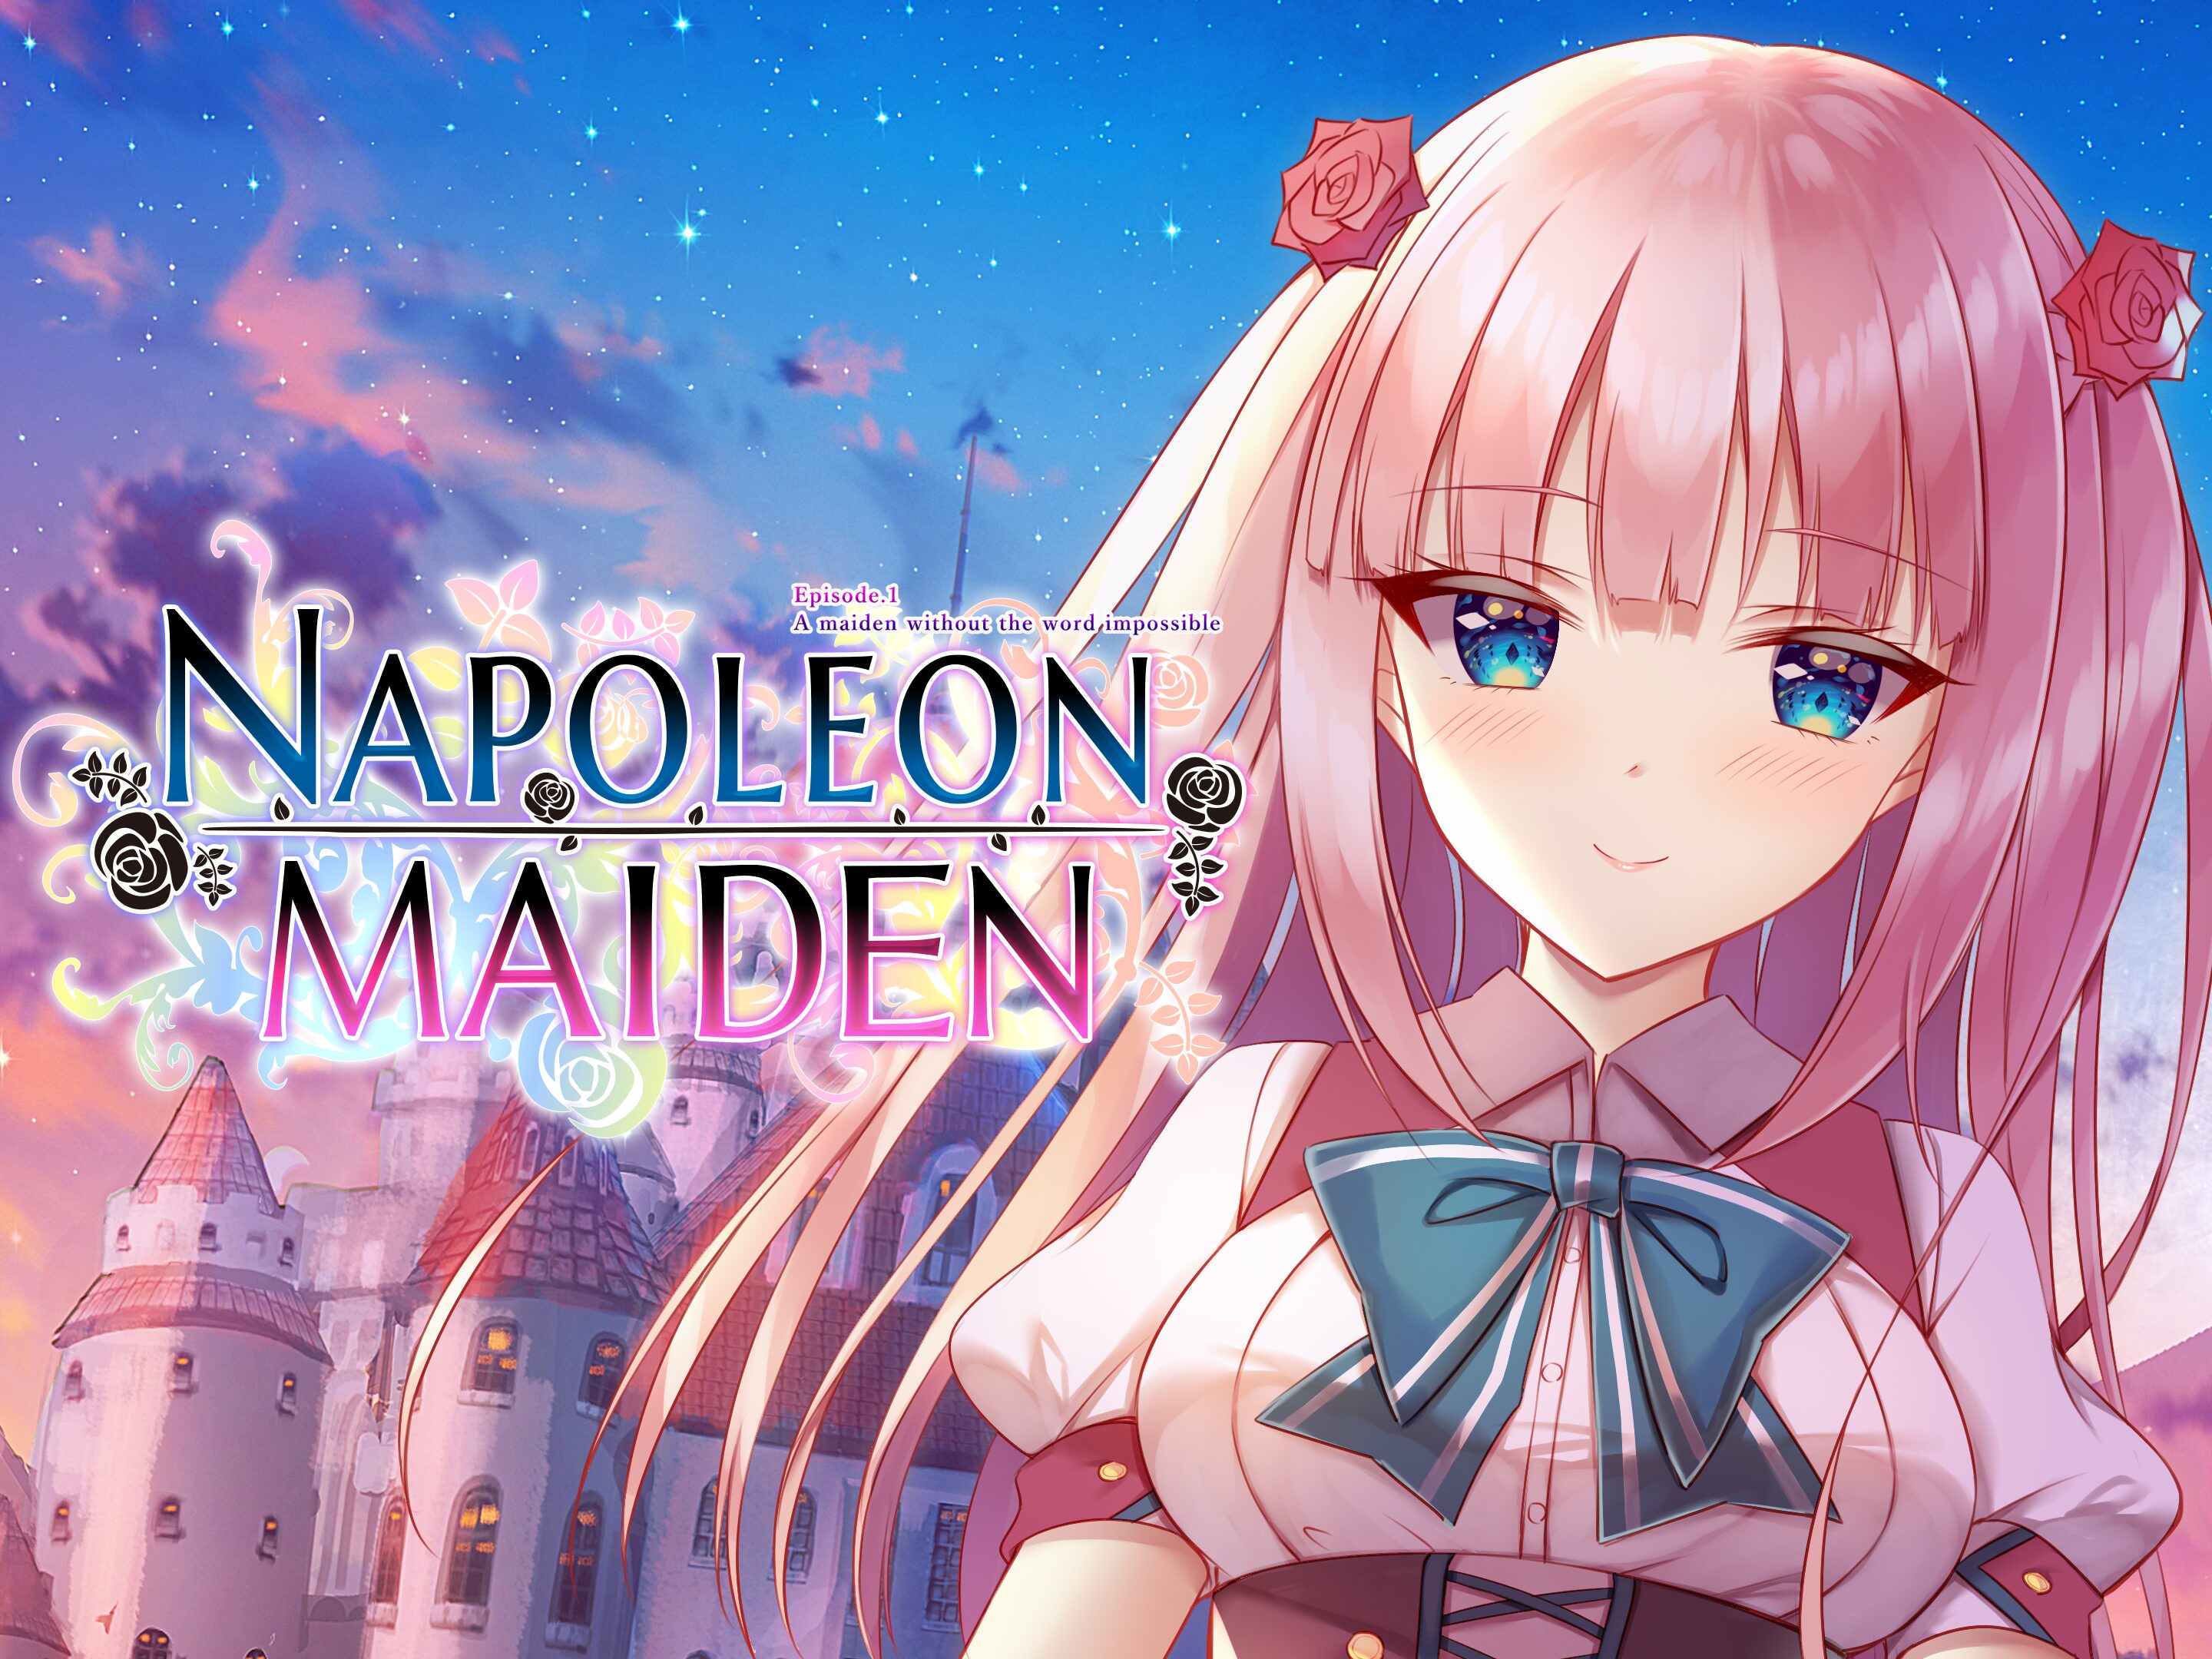 Napoleon Maiden  A maiden without the word impossible